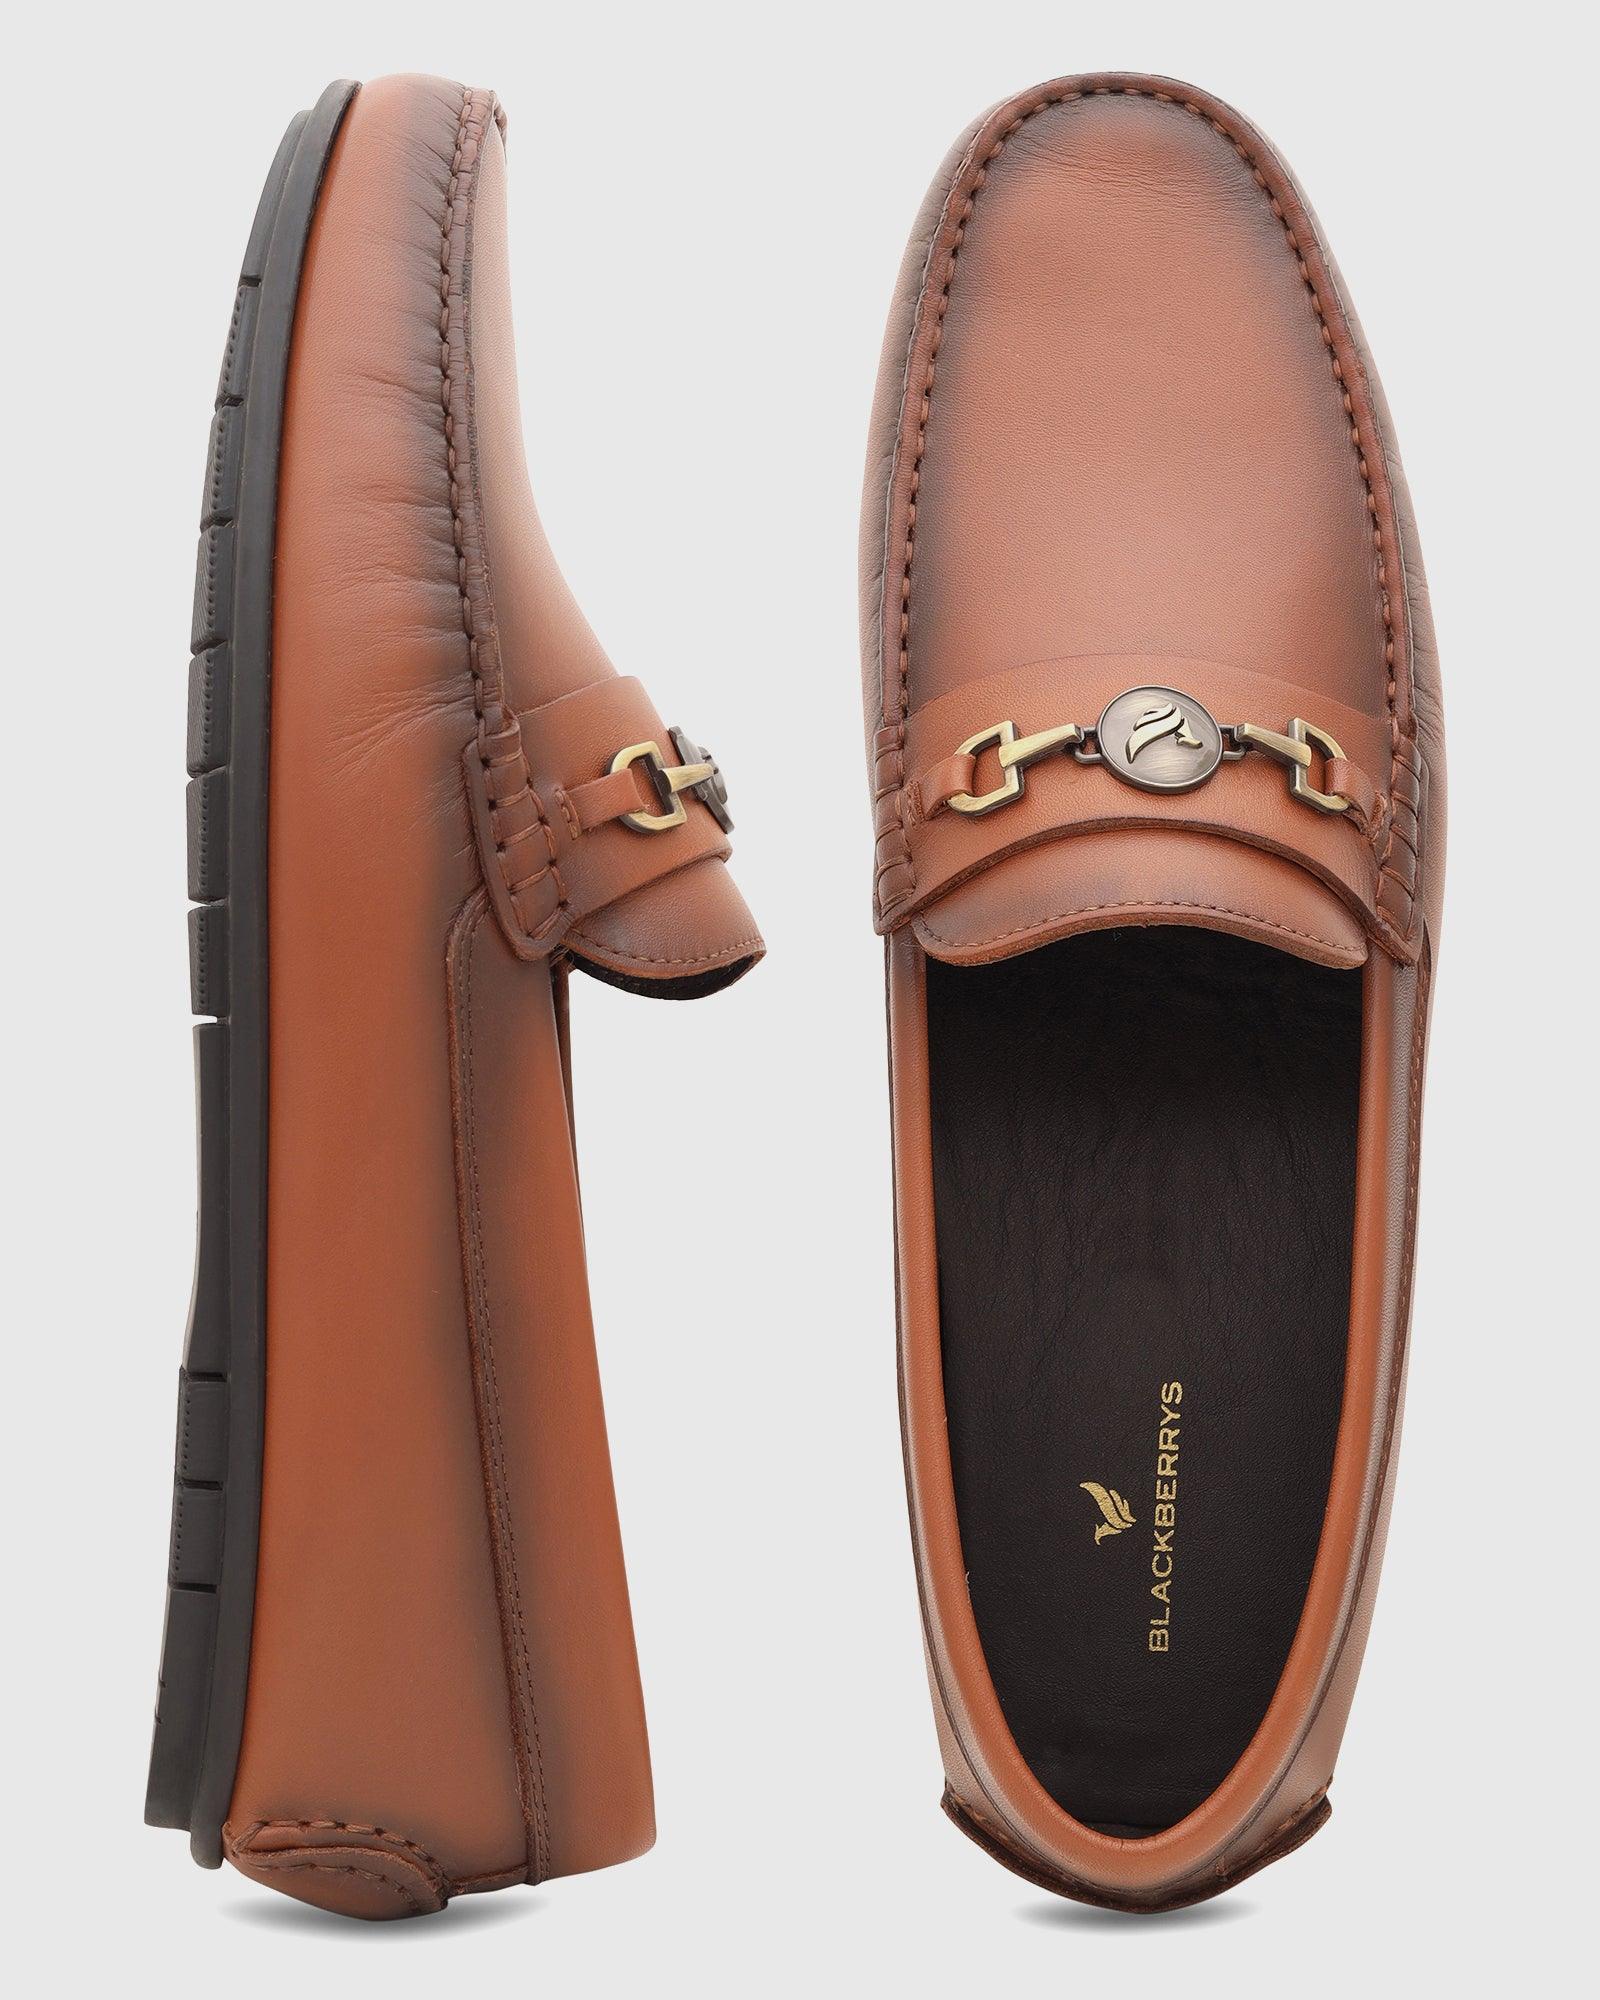 Loafer shoes: Stylish and comfortable style that every man should own | -  Times of India